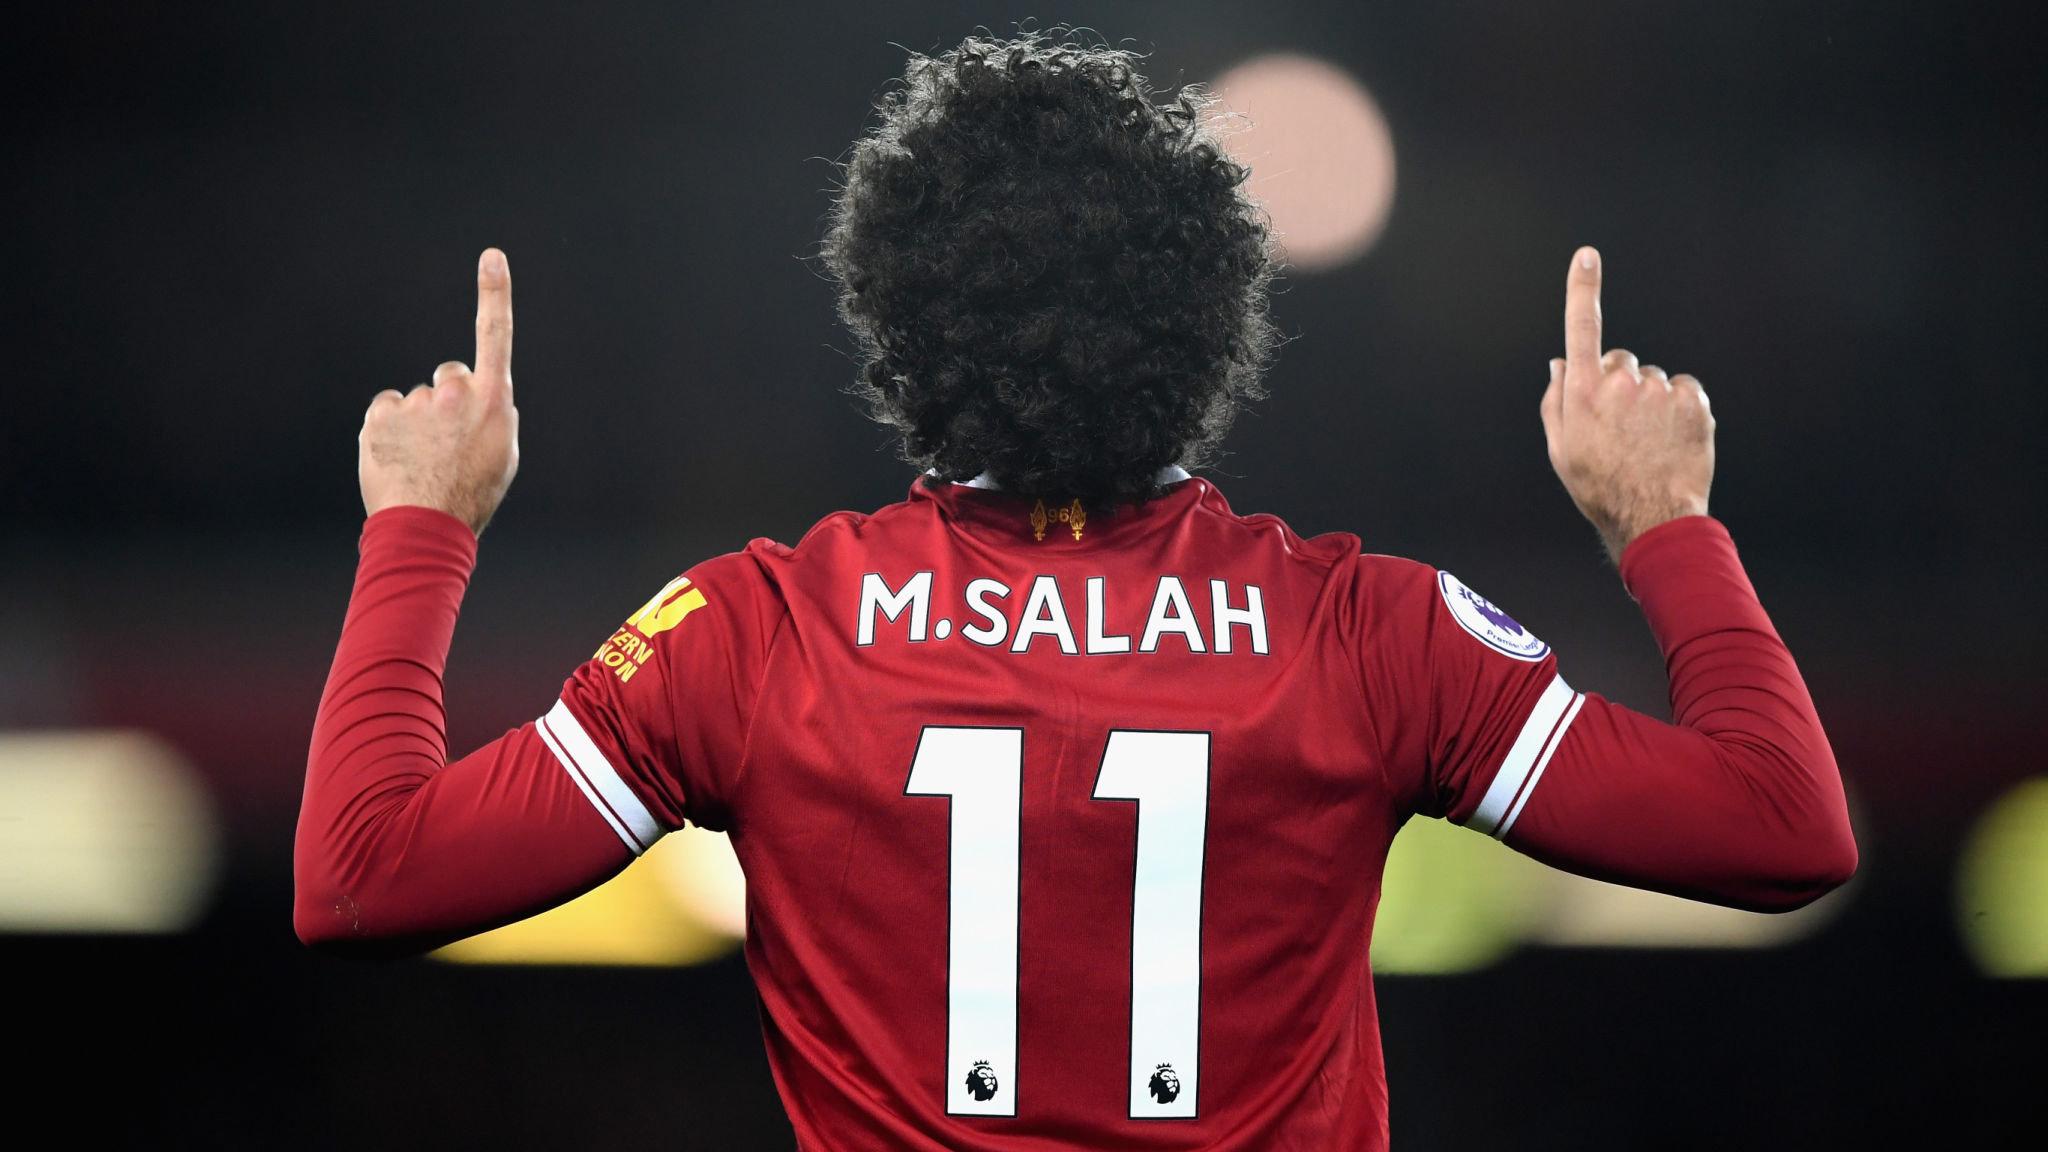 Mohamed Salah's transformation from Chelsea misfit to